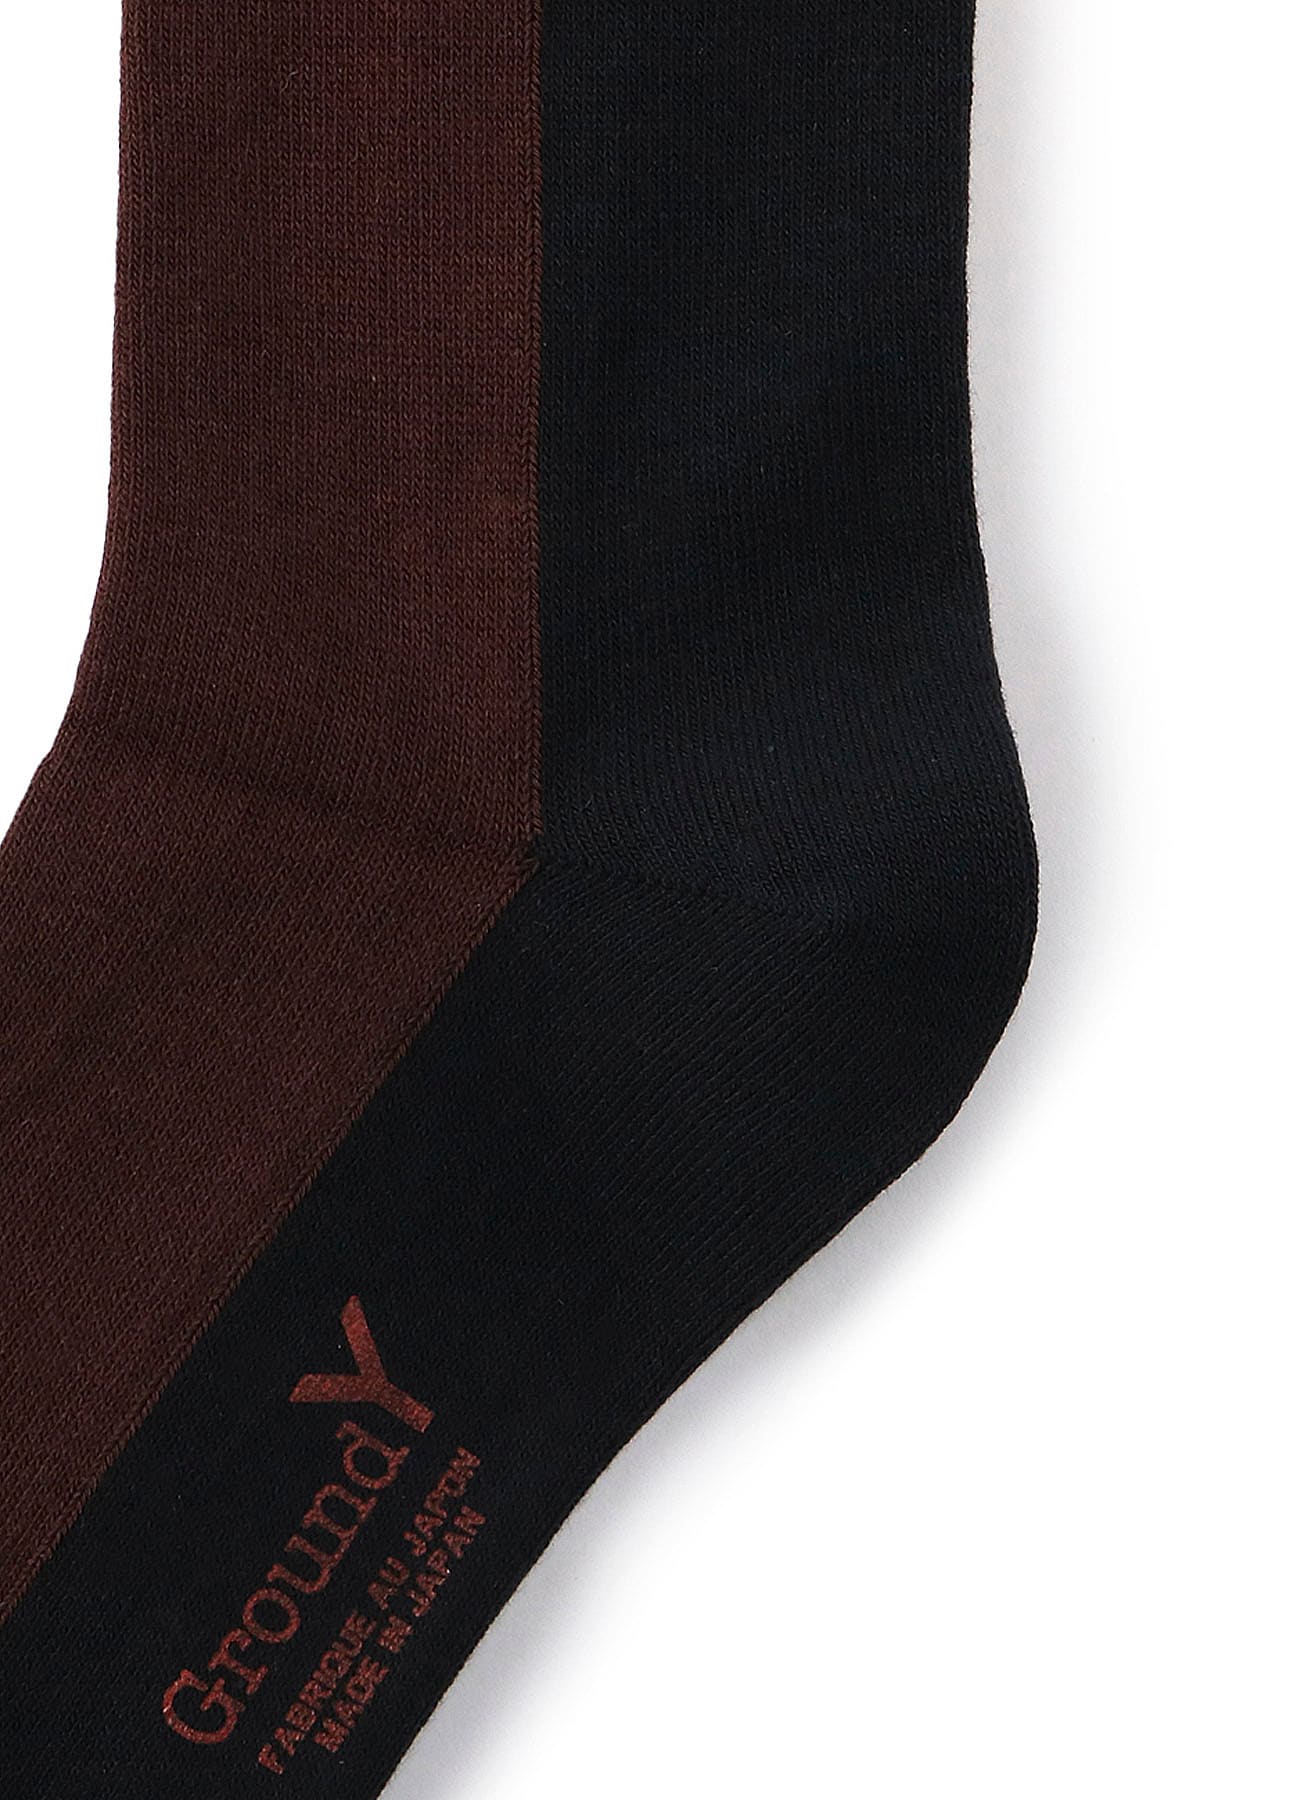 Front and Back Two Color Socks